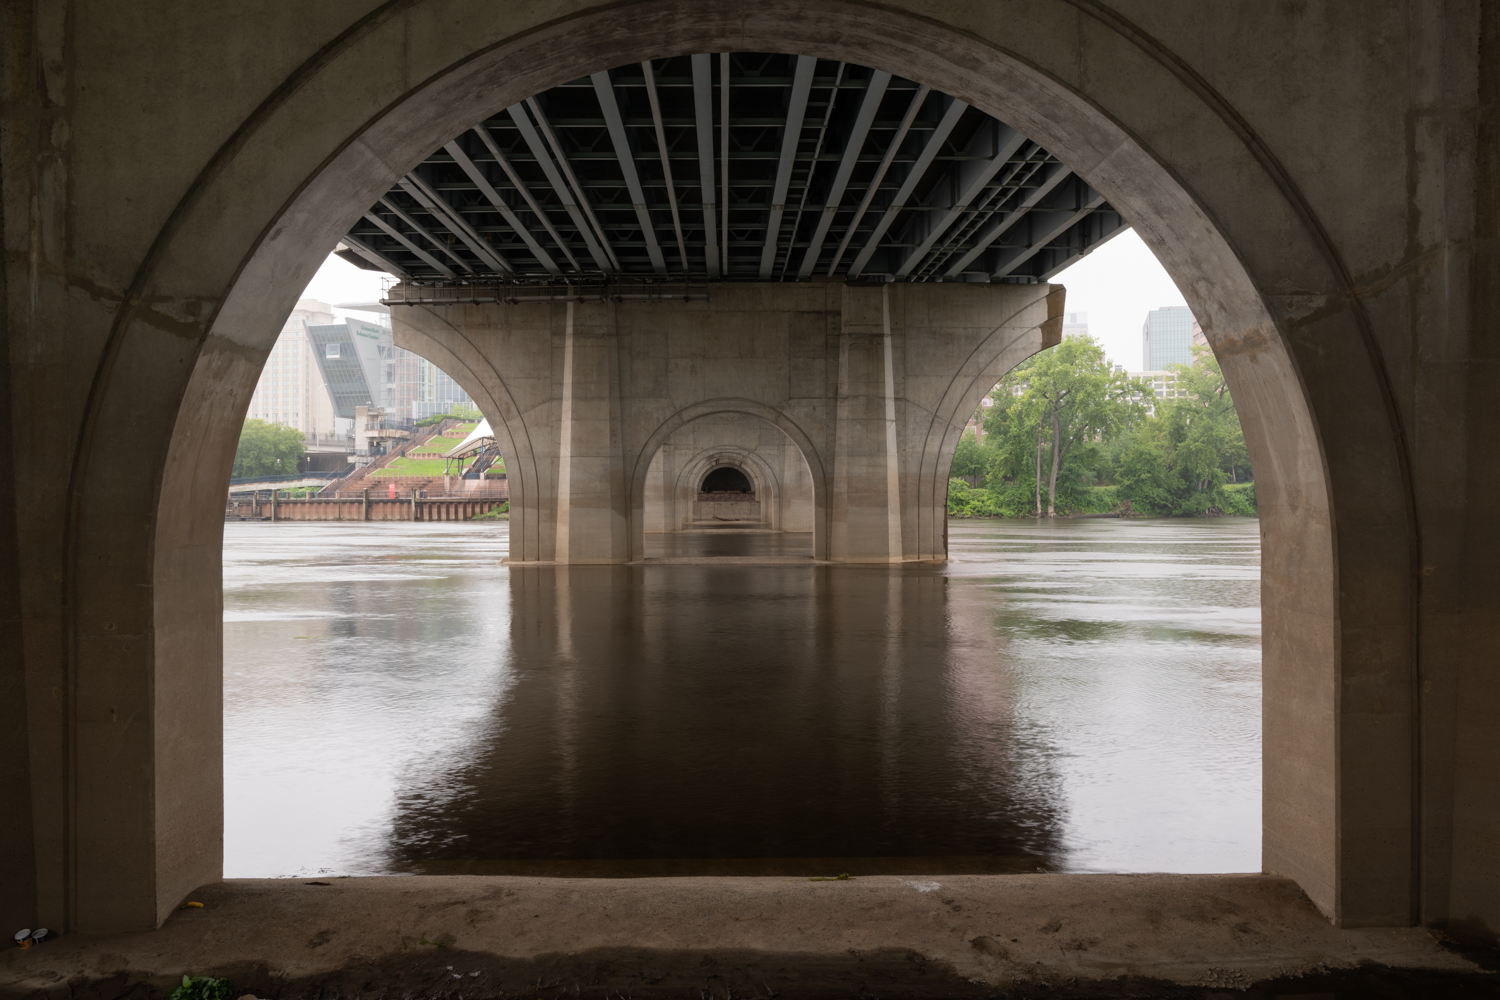 A photograph of the Founder's Bridge in Hartford, part of an exhibit by photography professor Janet Pritchard at UConn Avery Point.